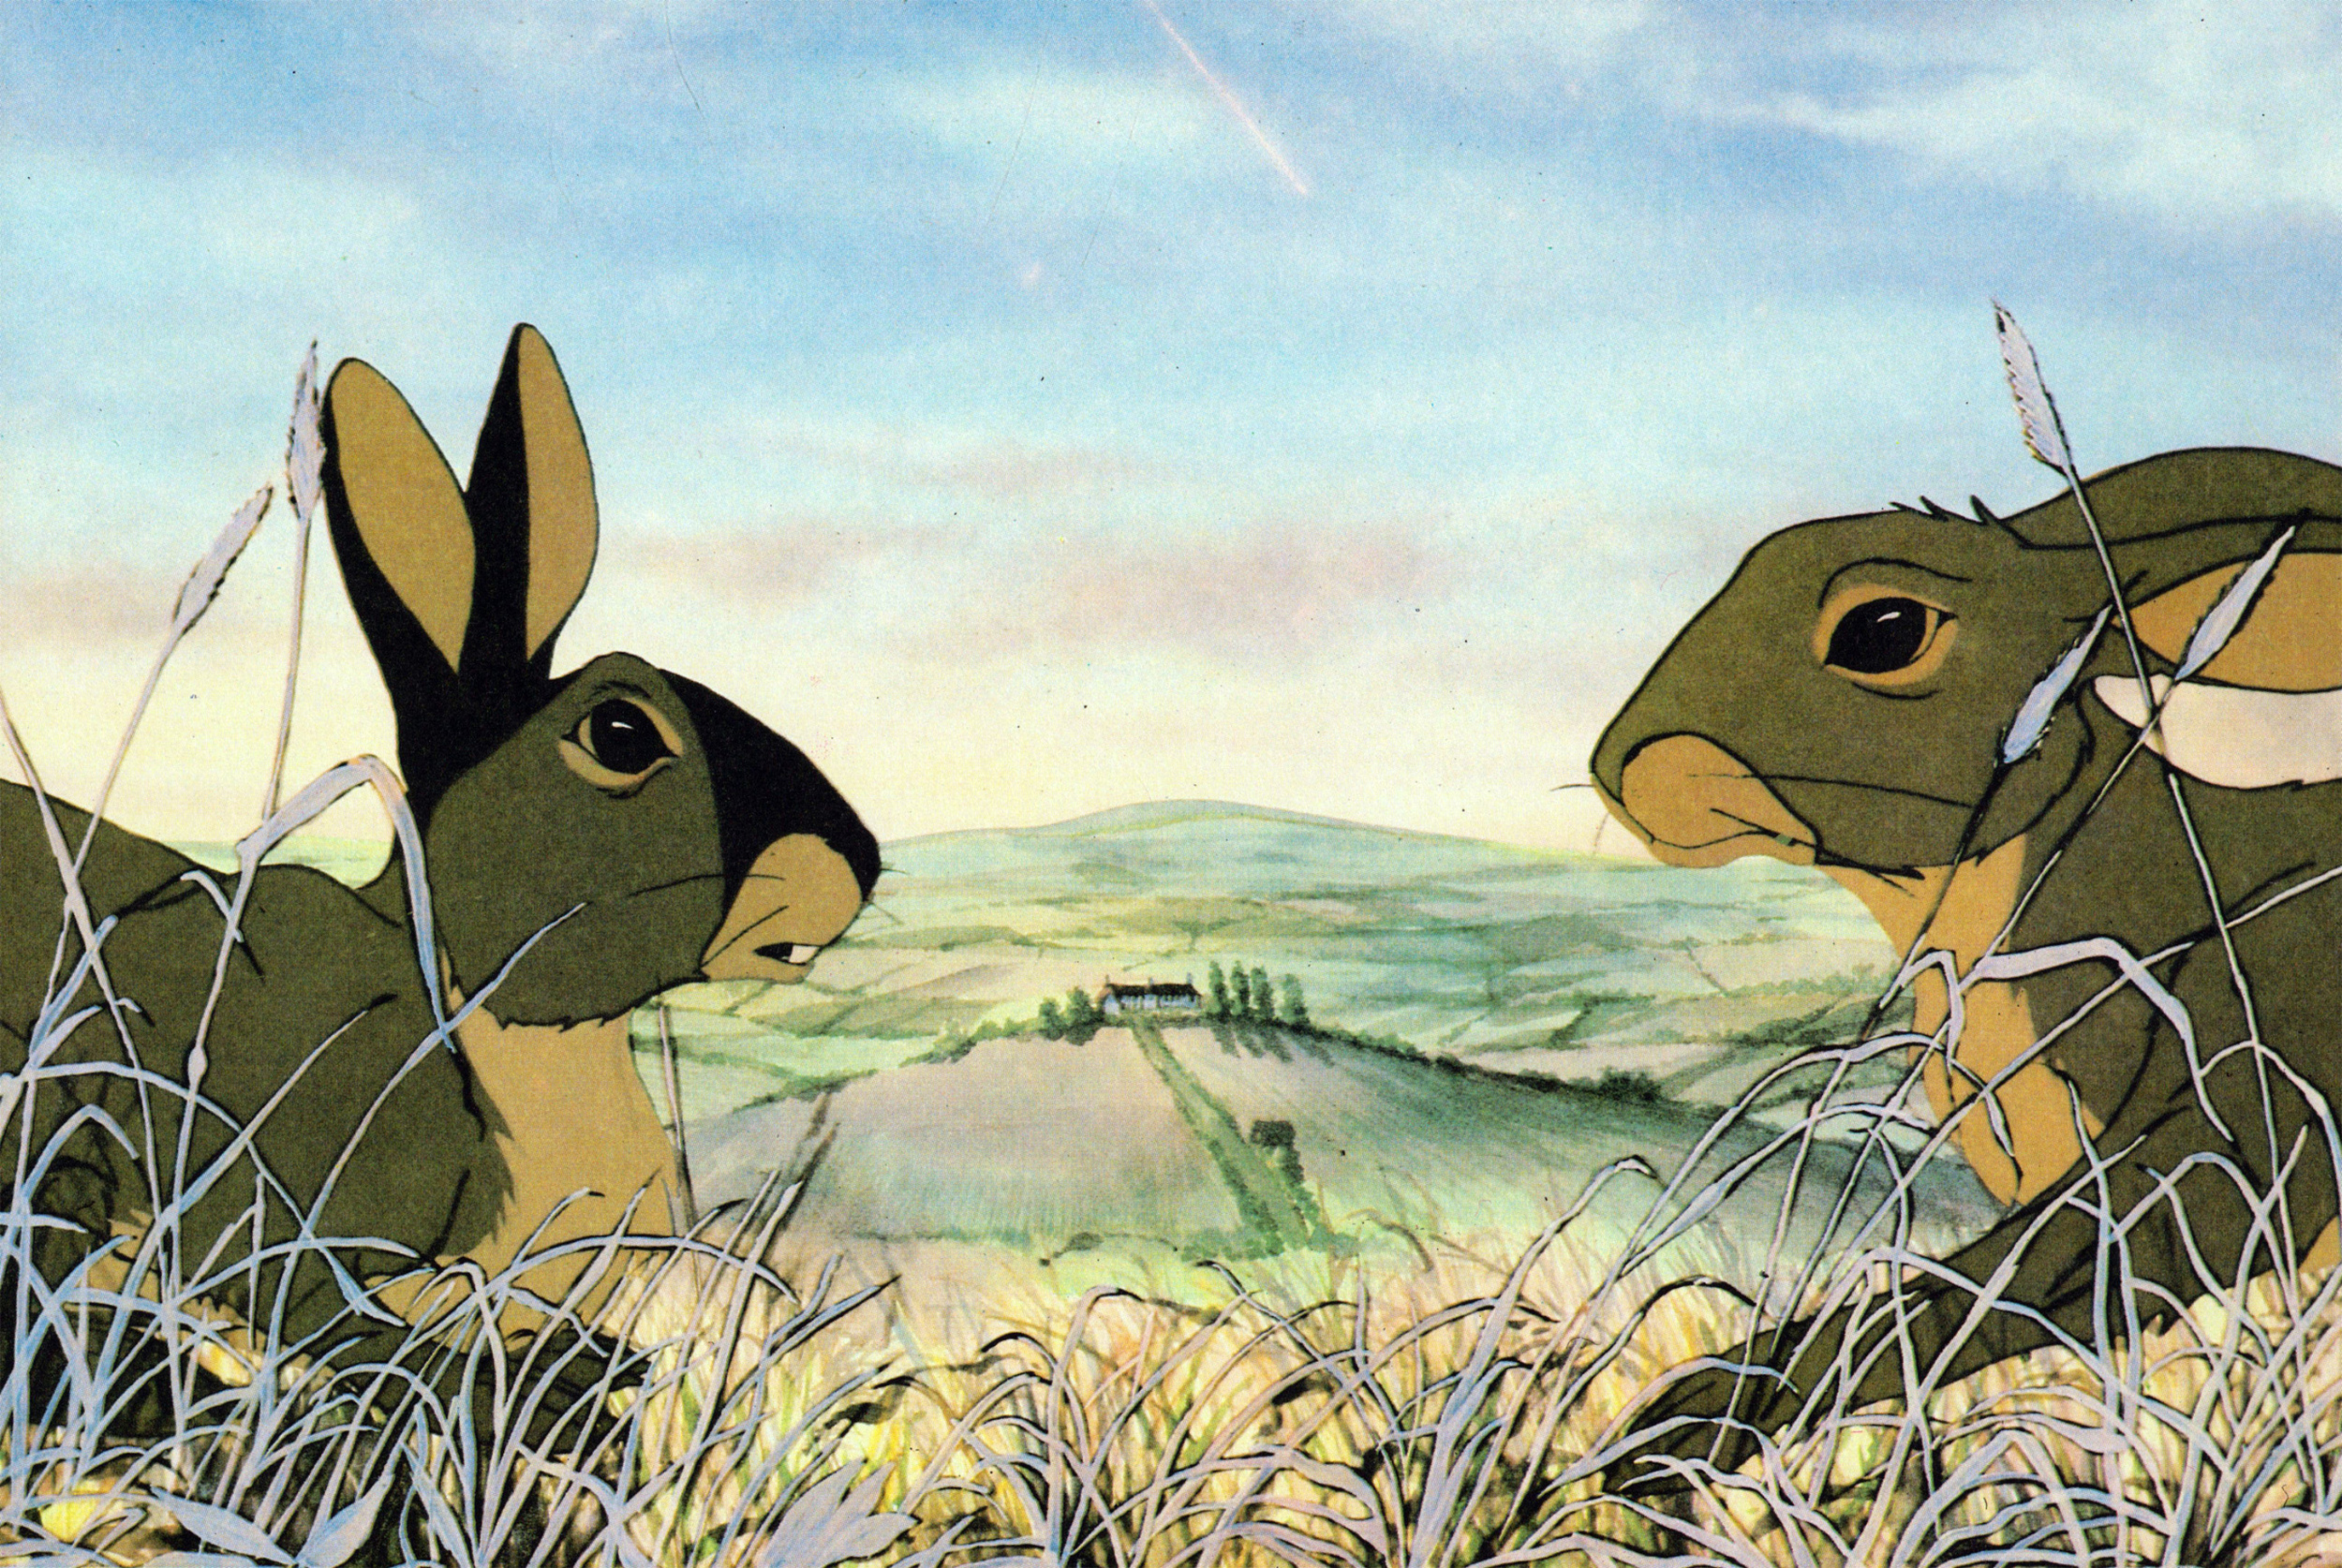 <p><em>Watership Down</em> <span>is one of those dark animated films that left an indelible impression on those who watched it as children. Focusing on a group of rabbits who try to find a new home for their people, it does a very good job translating many of the key elements and themes of the original novel into animated form. It also features some very compelling voice acting from the likes of John Hurt, Rory Kinnear, and Zero Mostel (this was the latter’s last role). It also doesn’t shy away from the story's more brutal and graphic elements, which helps set it apart from other animated fare.</span></p><p><a href='https://www.msn.com/en-us/community/channel/vid-cj9pqbr0vn9in2b6ddcd8sfgpfq6x6utp44fssrv6mc2gtybw0us'>Follow us on MSN to see more of our exclusive entertainment content.</a></p>